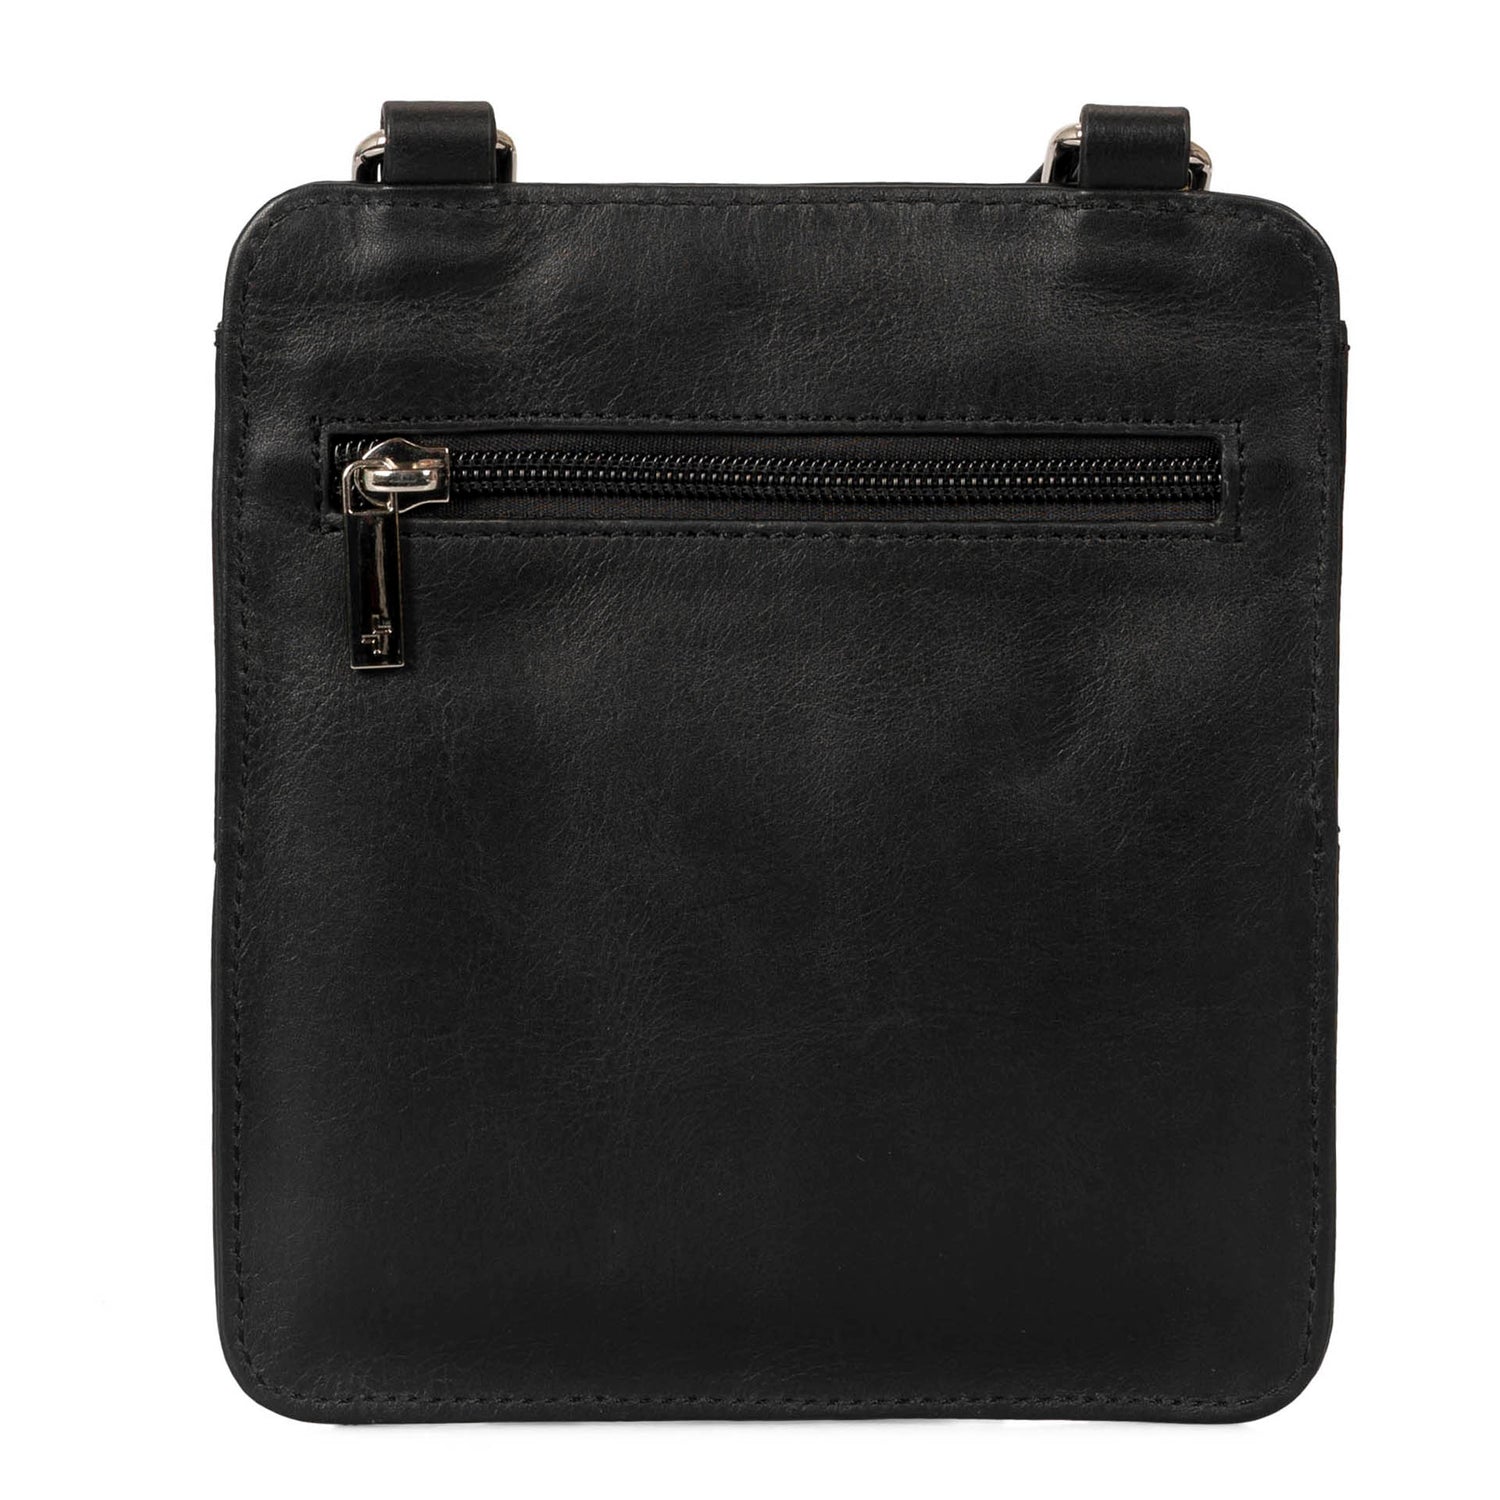 Back view of a black slim crossobdy bag called Basics designed by Tracker showing its supple leather, crossbody strap, and exterior zipper pocket.